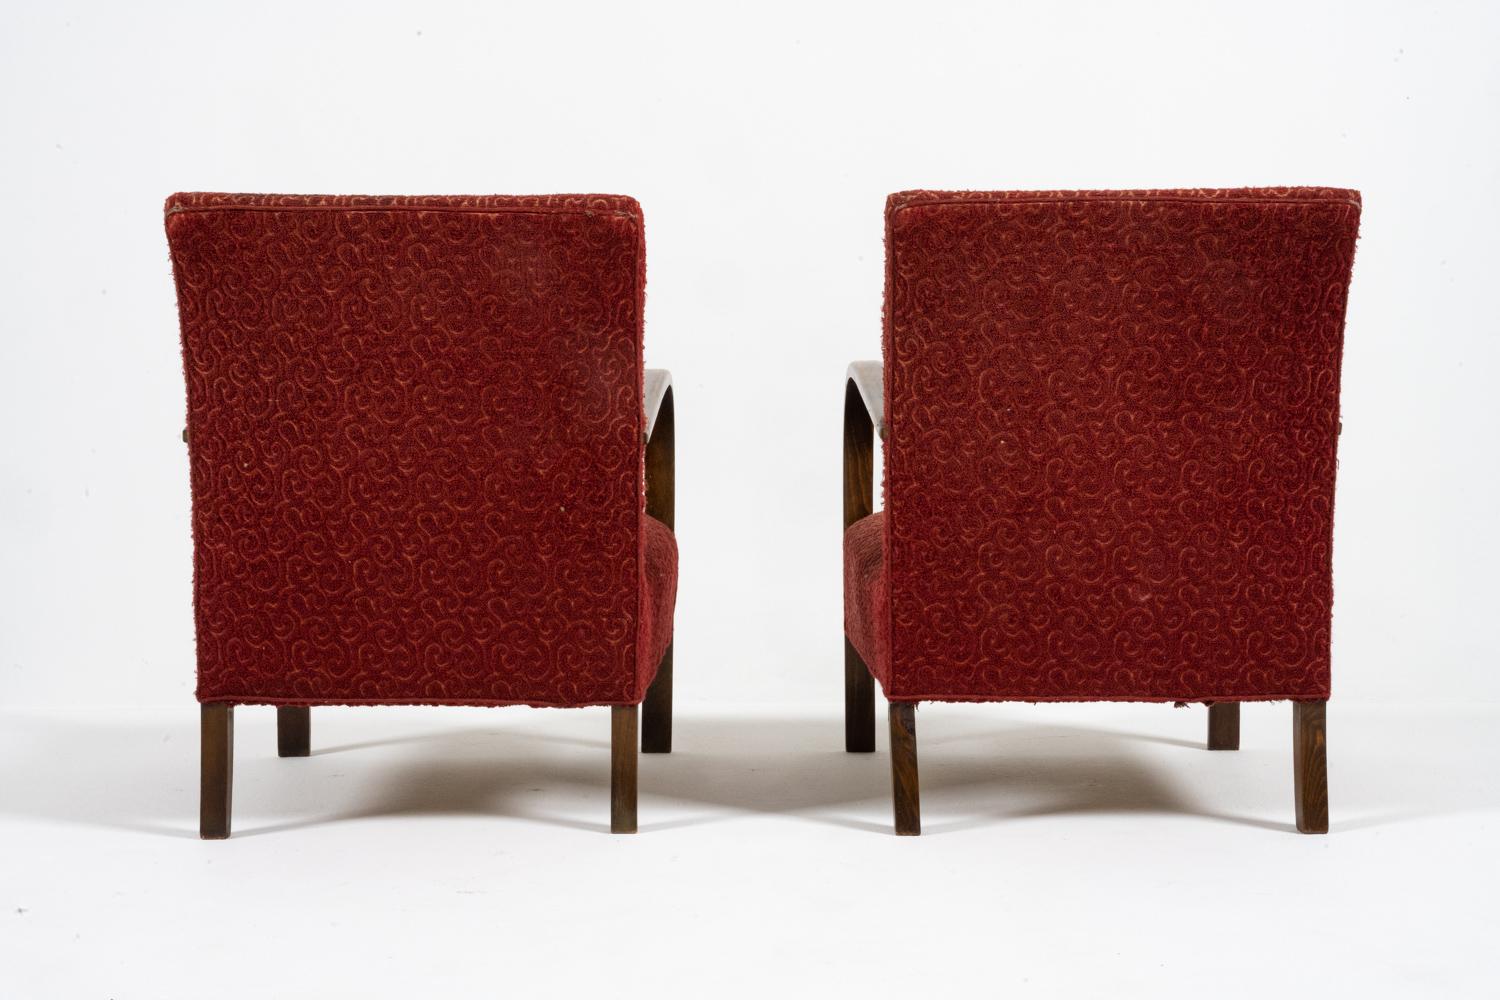 Pair of Danish Modern Lounge Chairs by Fritz Hansen, c. 1950s For Sale 3